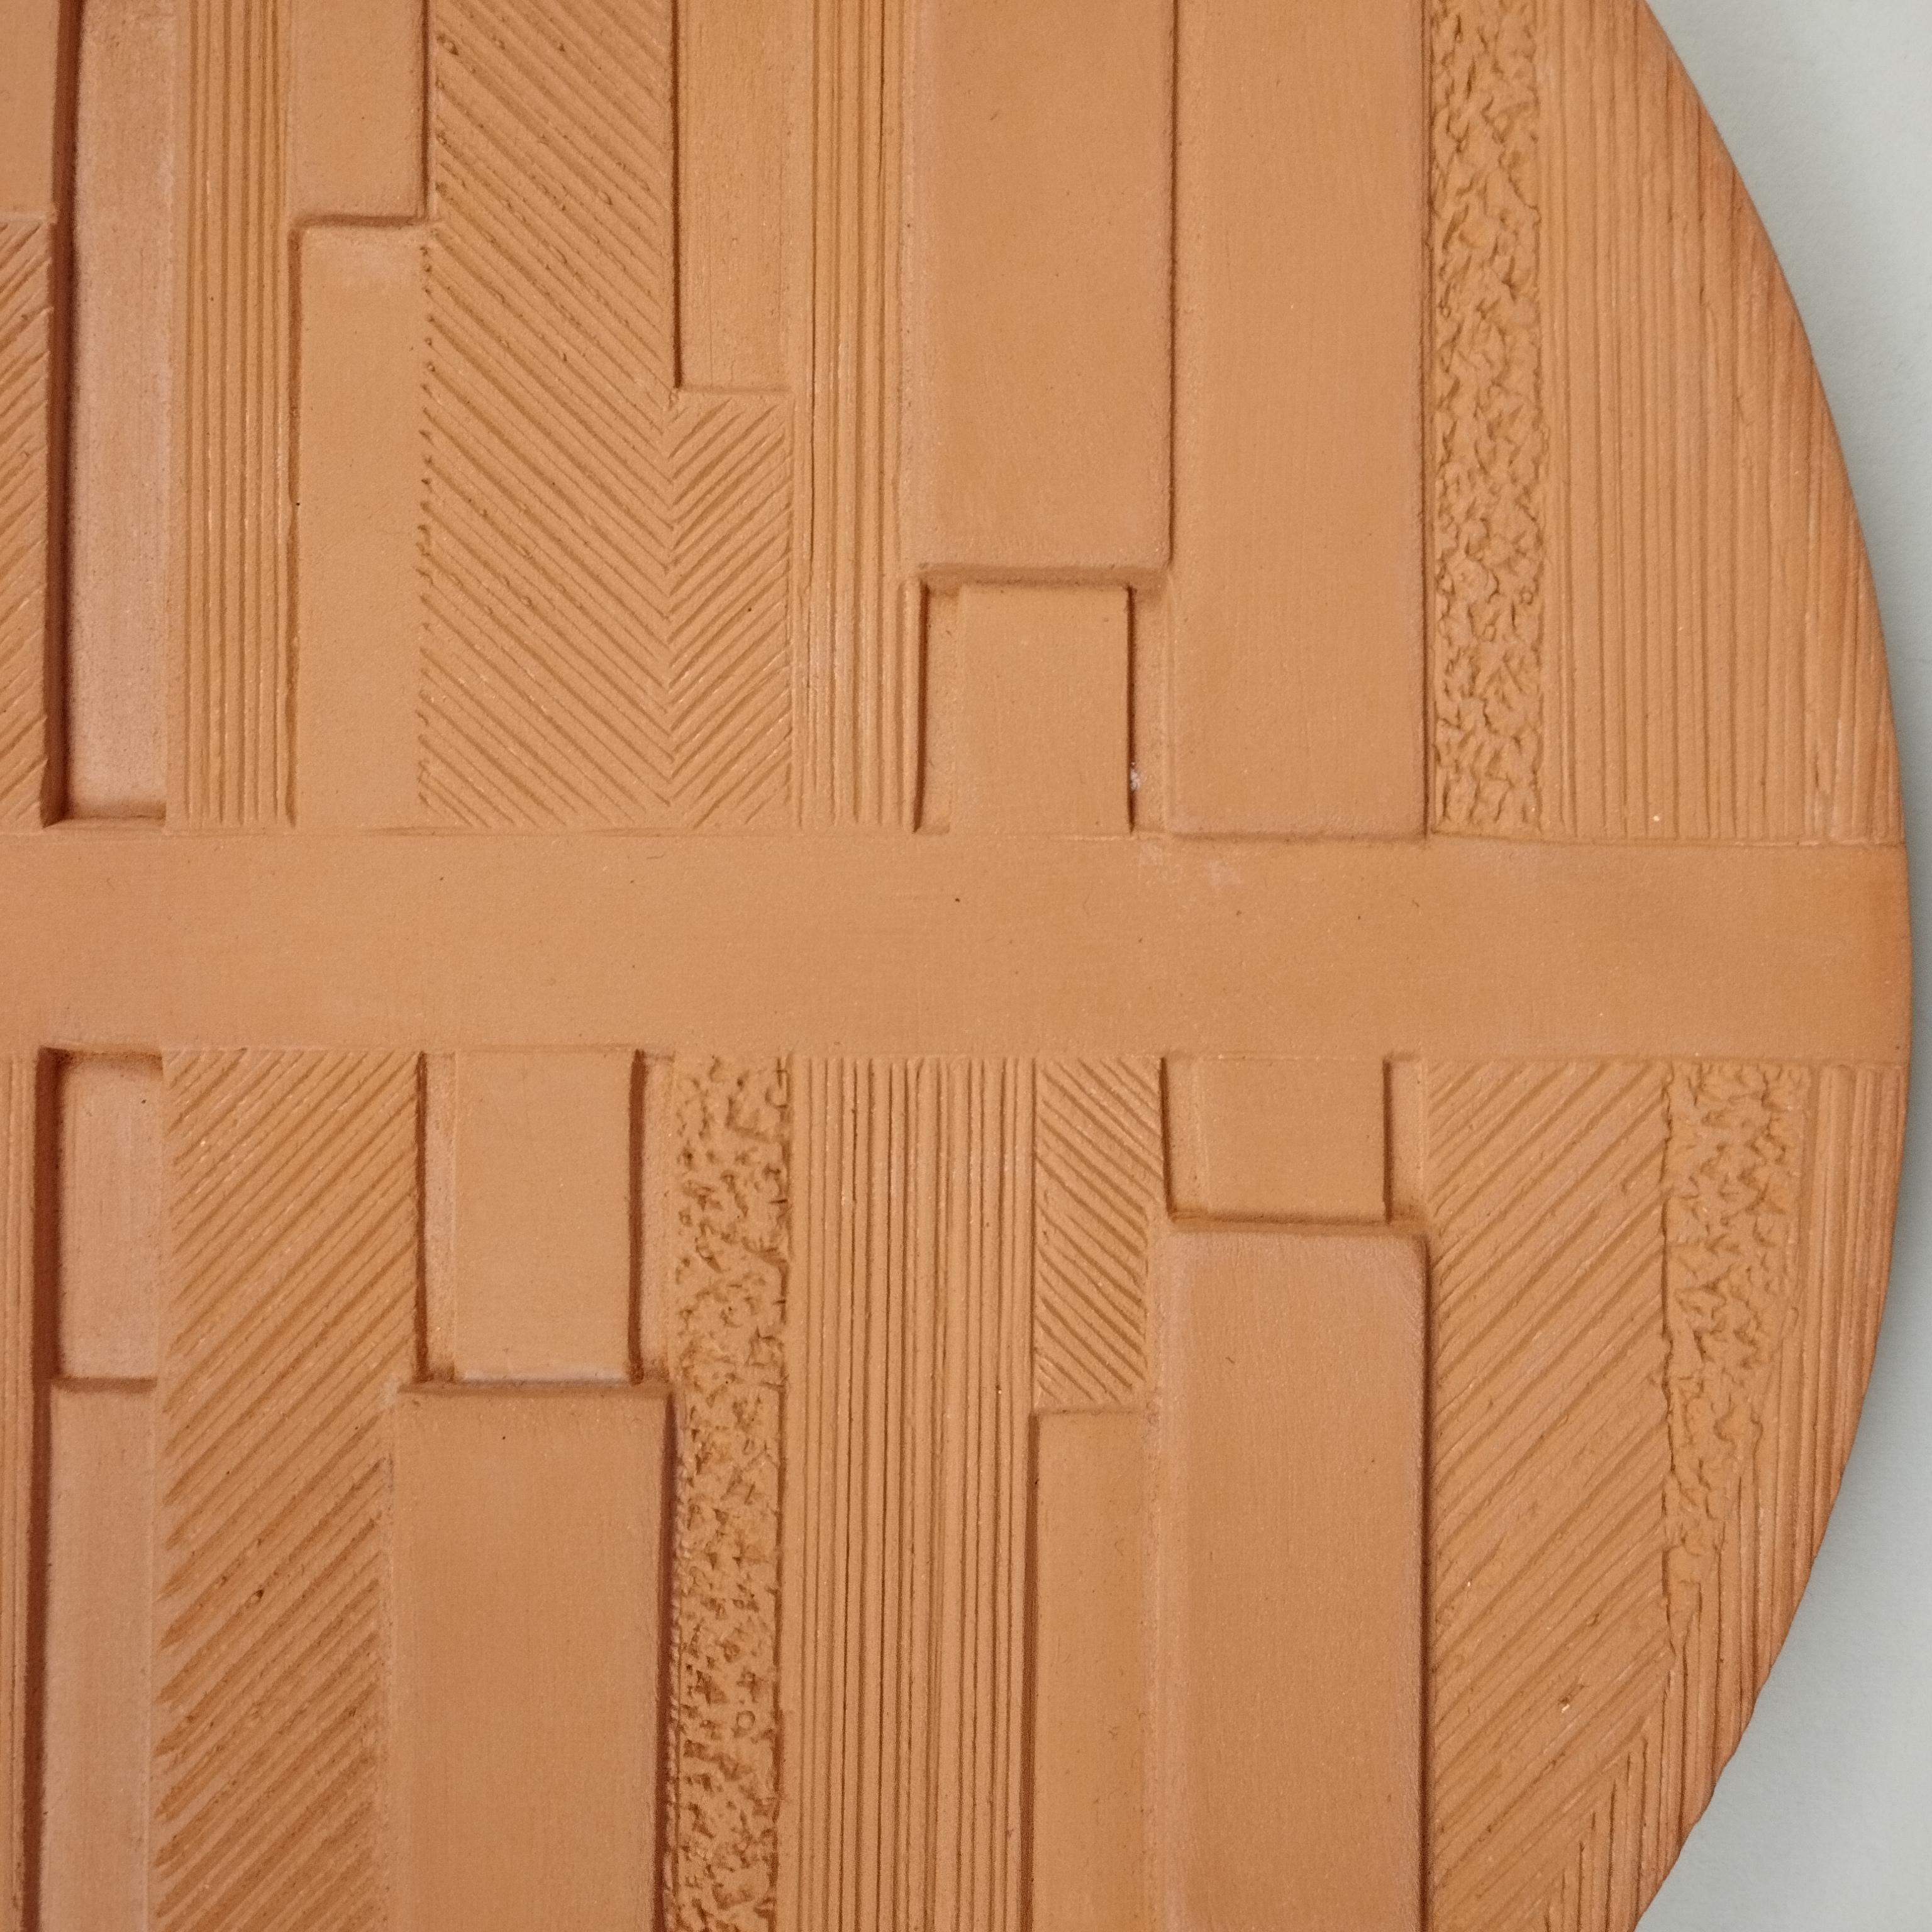 An oval geometric clay table sculpture by TALLER Mauricio Rocha + Gabriela Carrillo. This is an edition of 25 sets casted by Cerámica La Mejor, Mexico City, 2019.

The ceramic relief panel they created for this series reflects their focus on